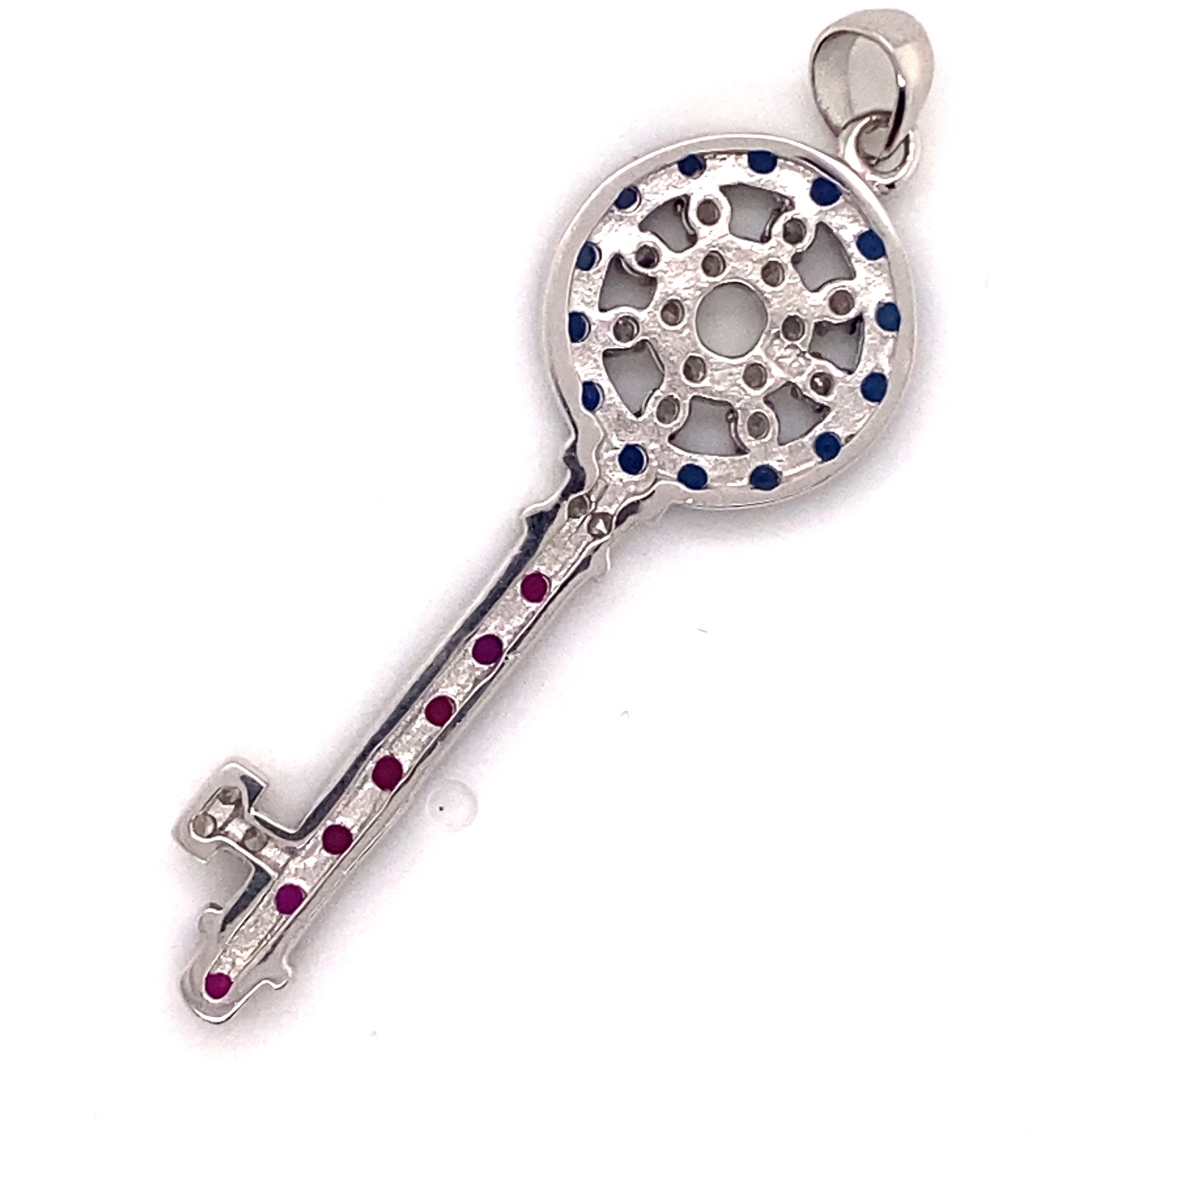 A SILVER AND CUBIC ZIRCONIA MULTI STONE SET KEY PENDANT, LENGTH 5cms, WEIGHT 3.7grms. - Image 2 of 2